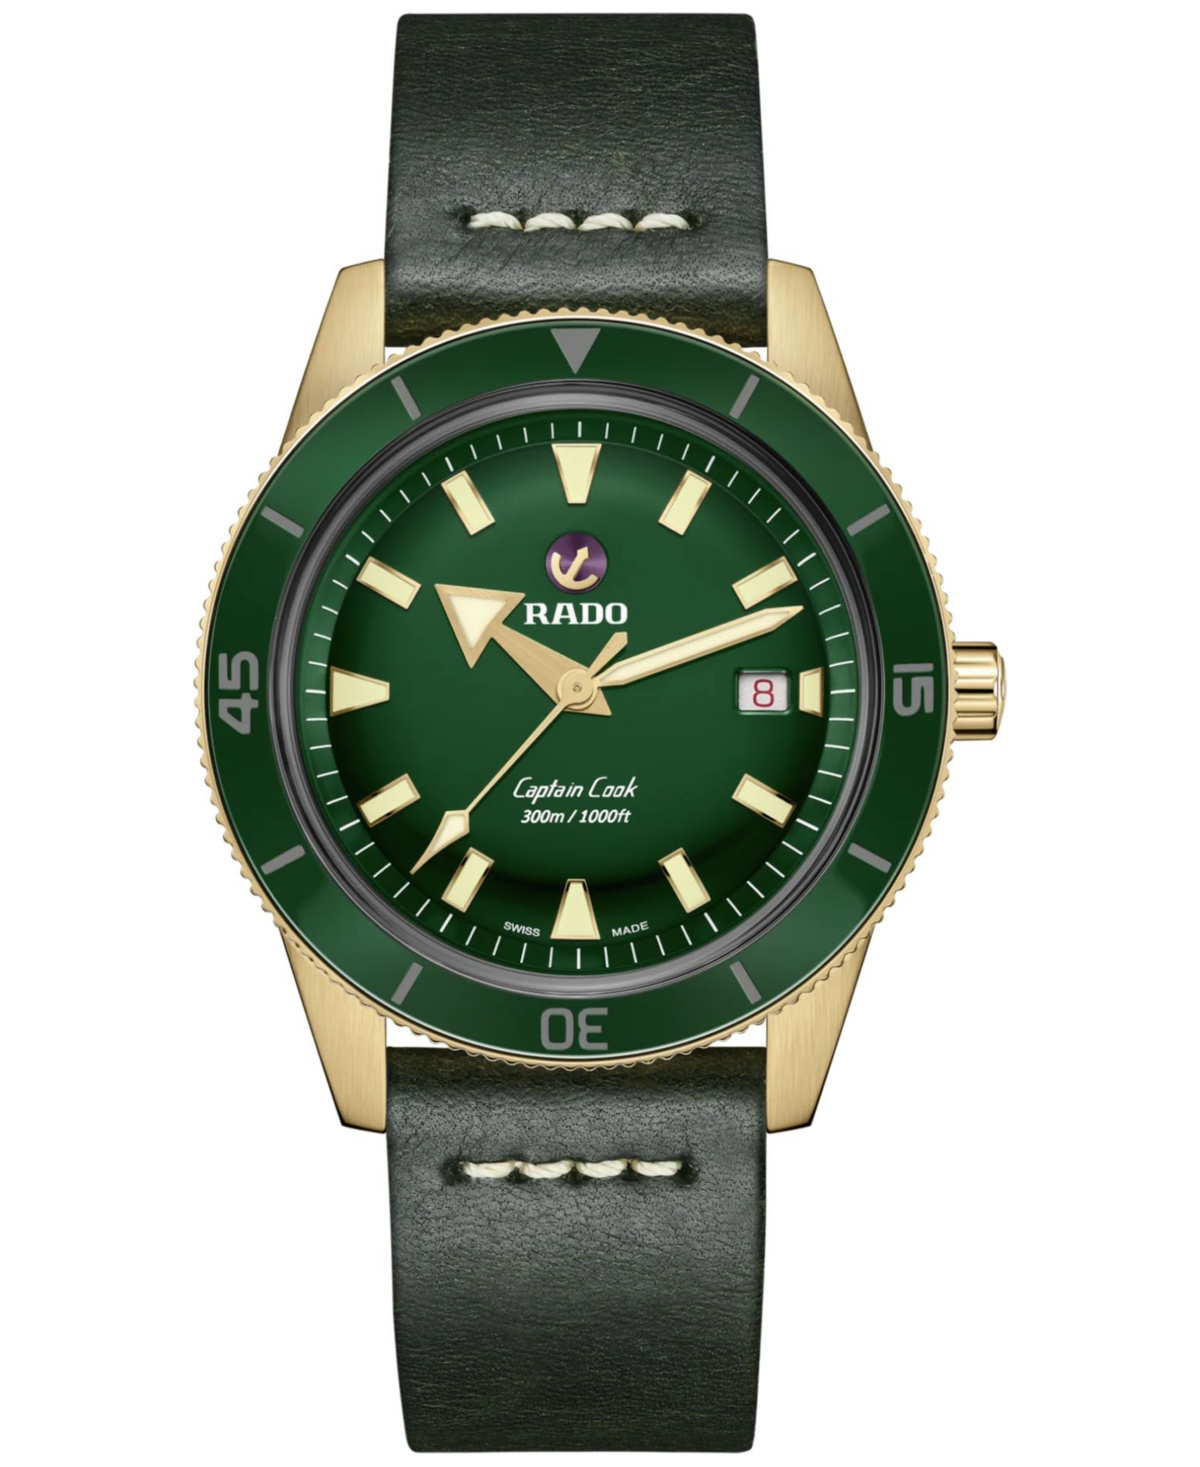 Captain Cook Men's Automatic Green Stainless Steel Strap Watch 42 mm - Green